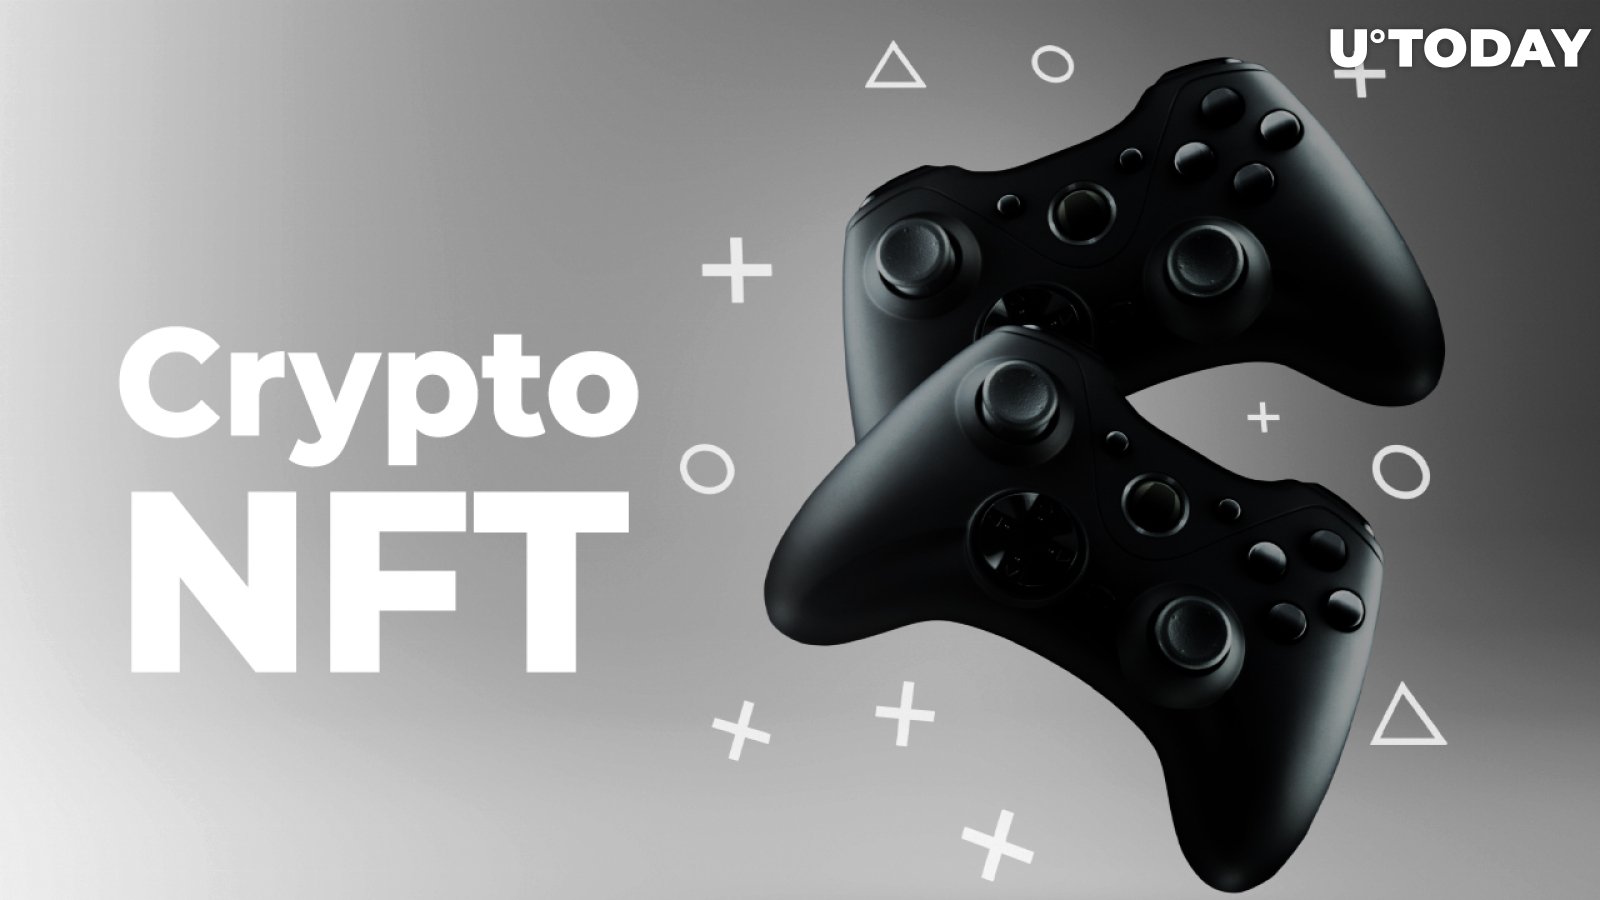 Video Game Devs Show Growing Interest in Crypto, NFTs: Stratis Report